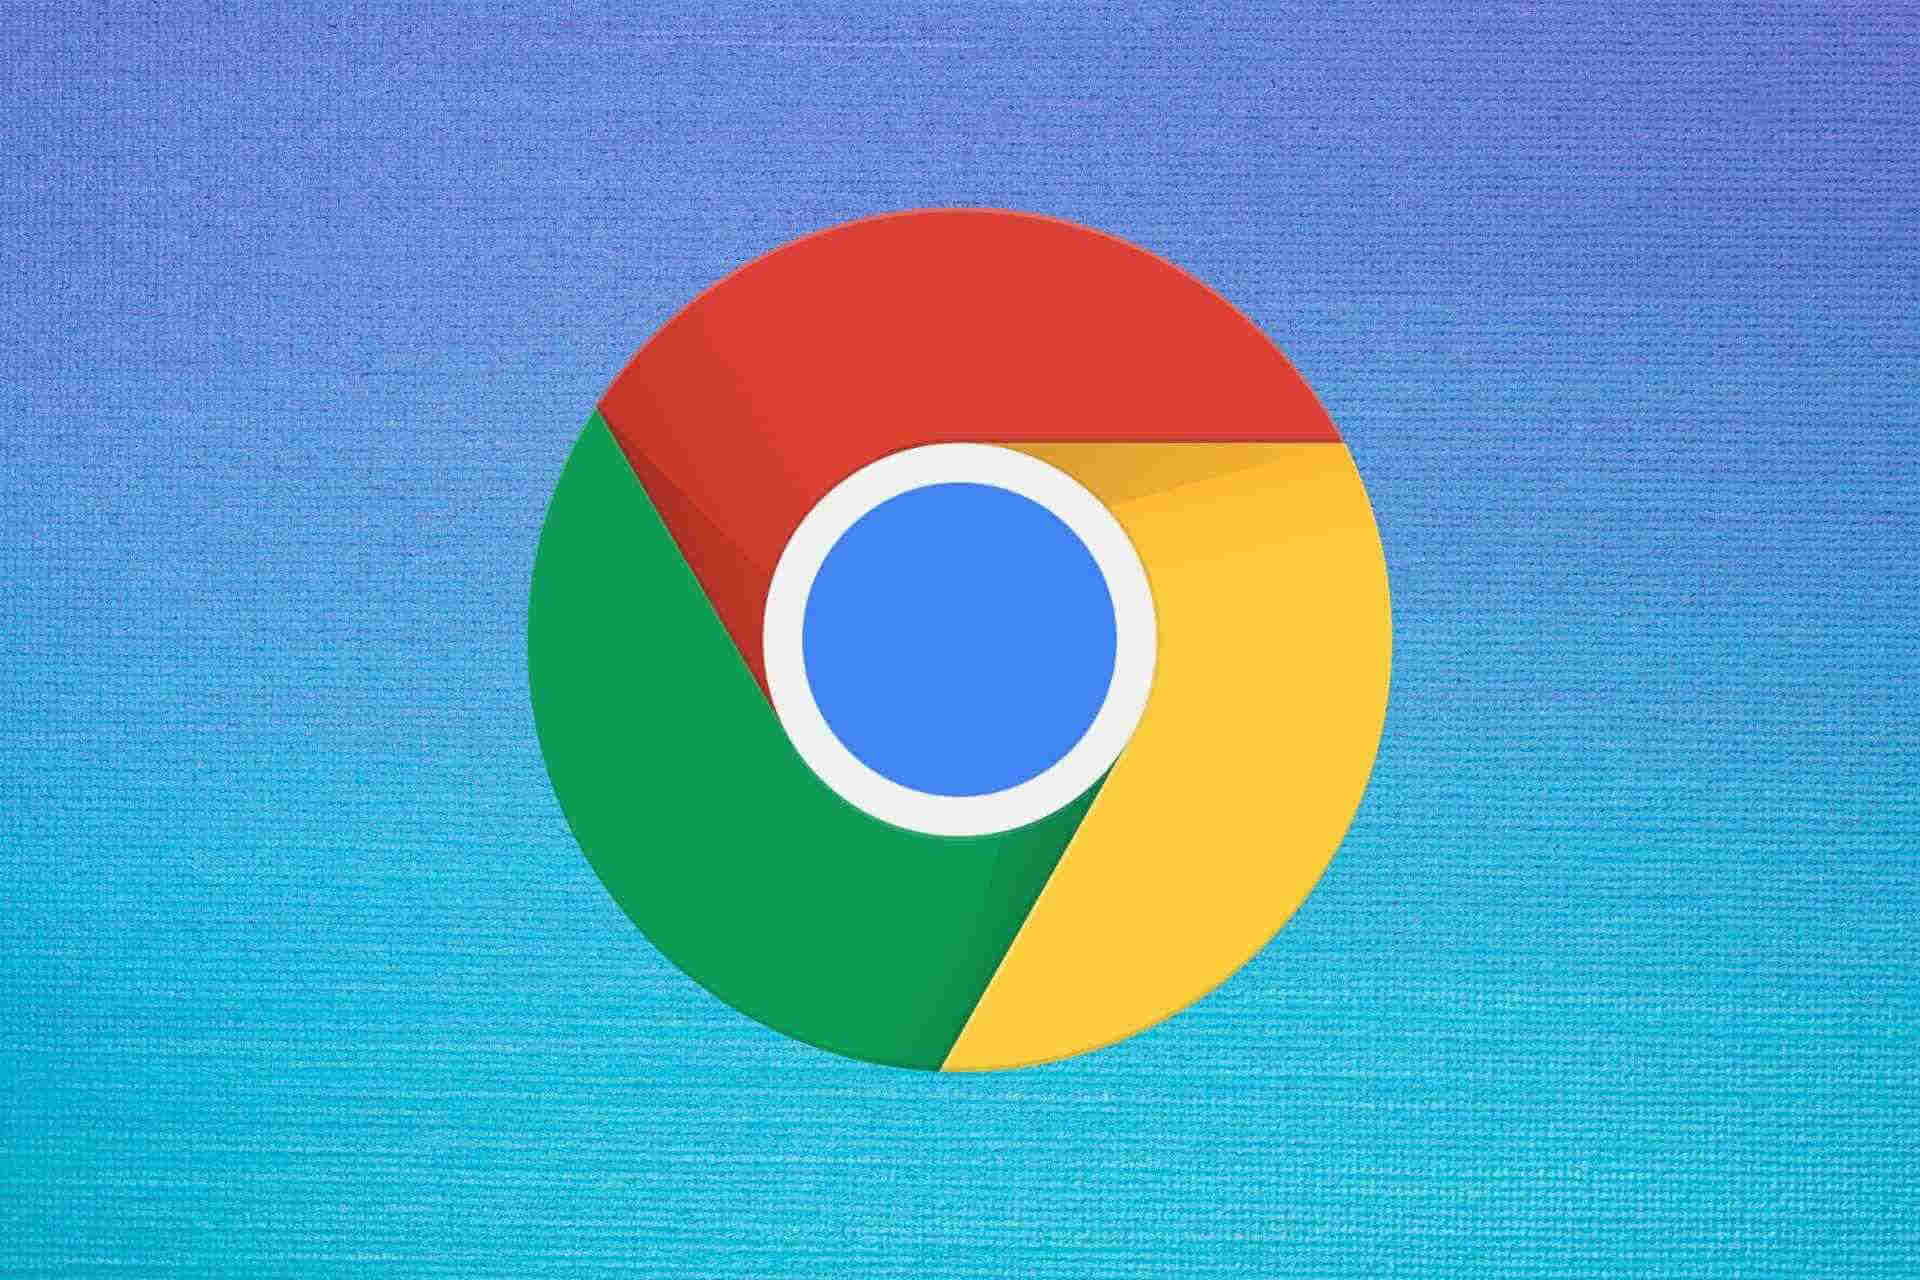 chromium web browser download for windows 10